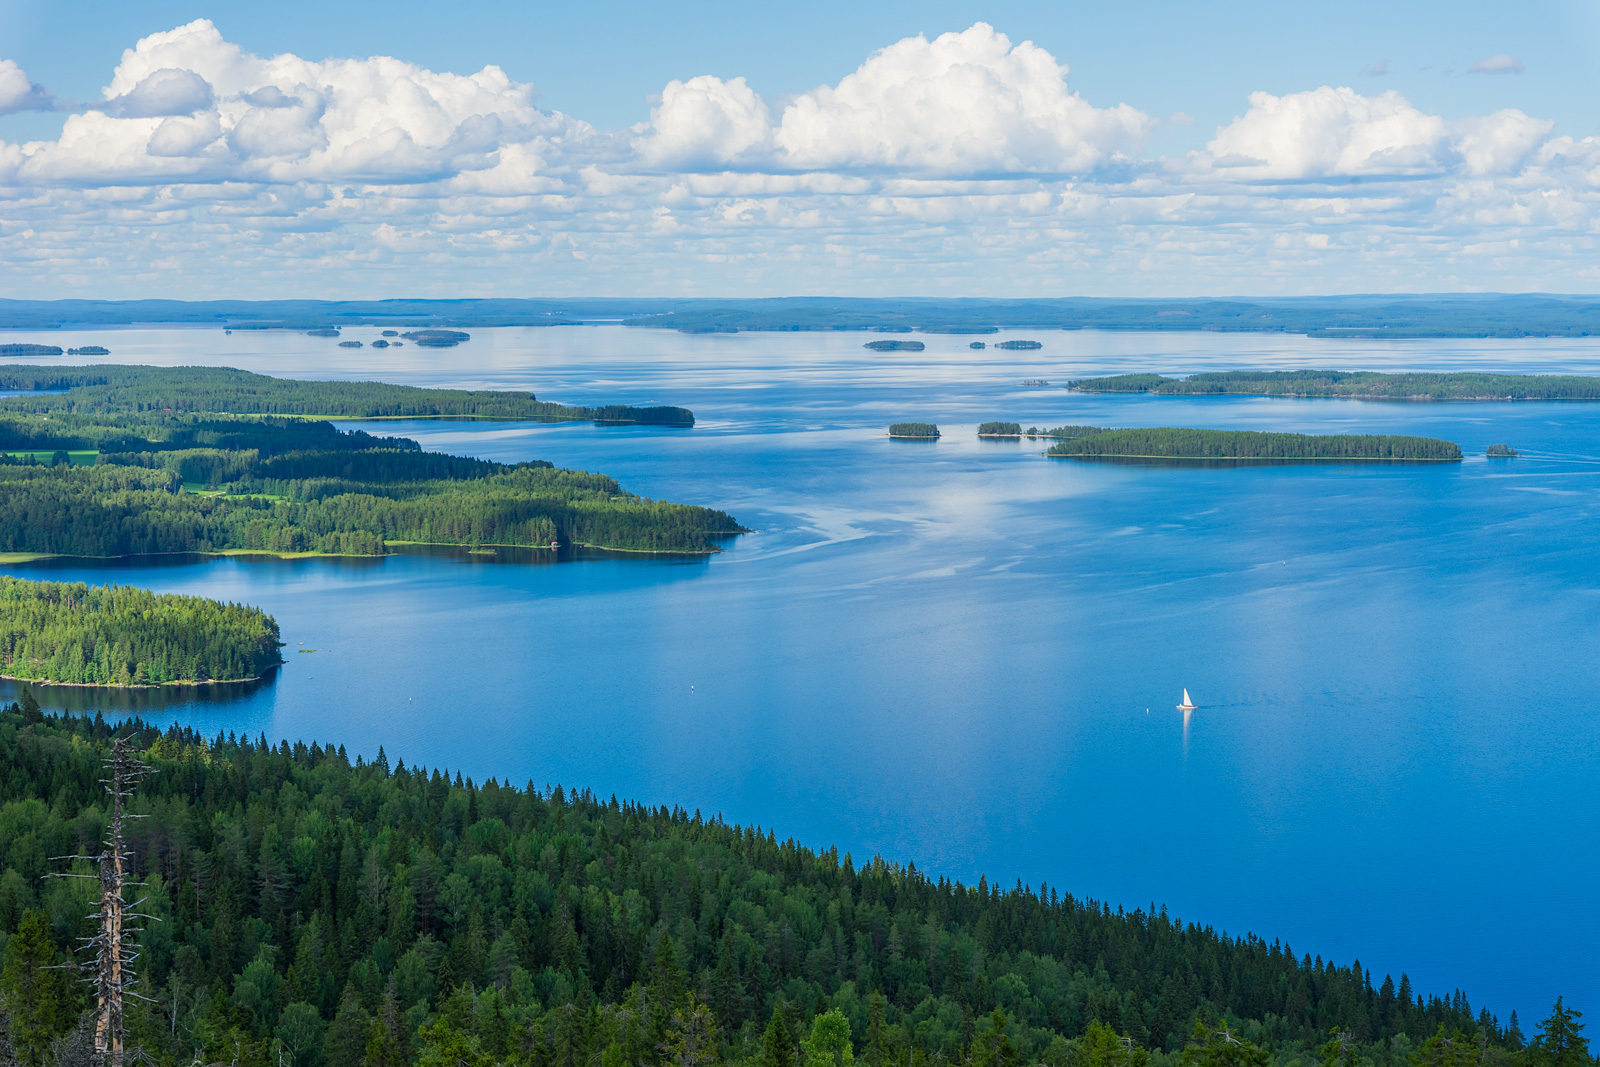 Colors of Koli and Pielinen: Blue – Green – White